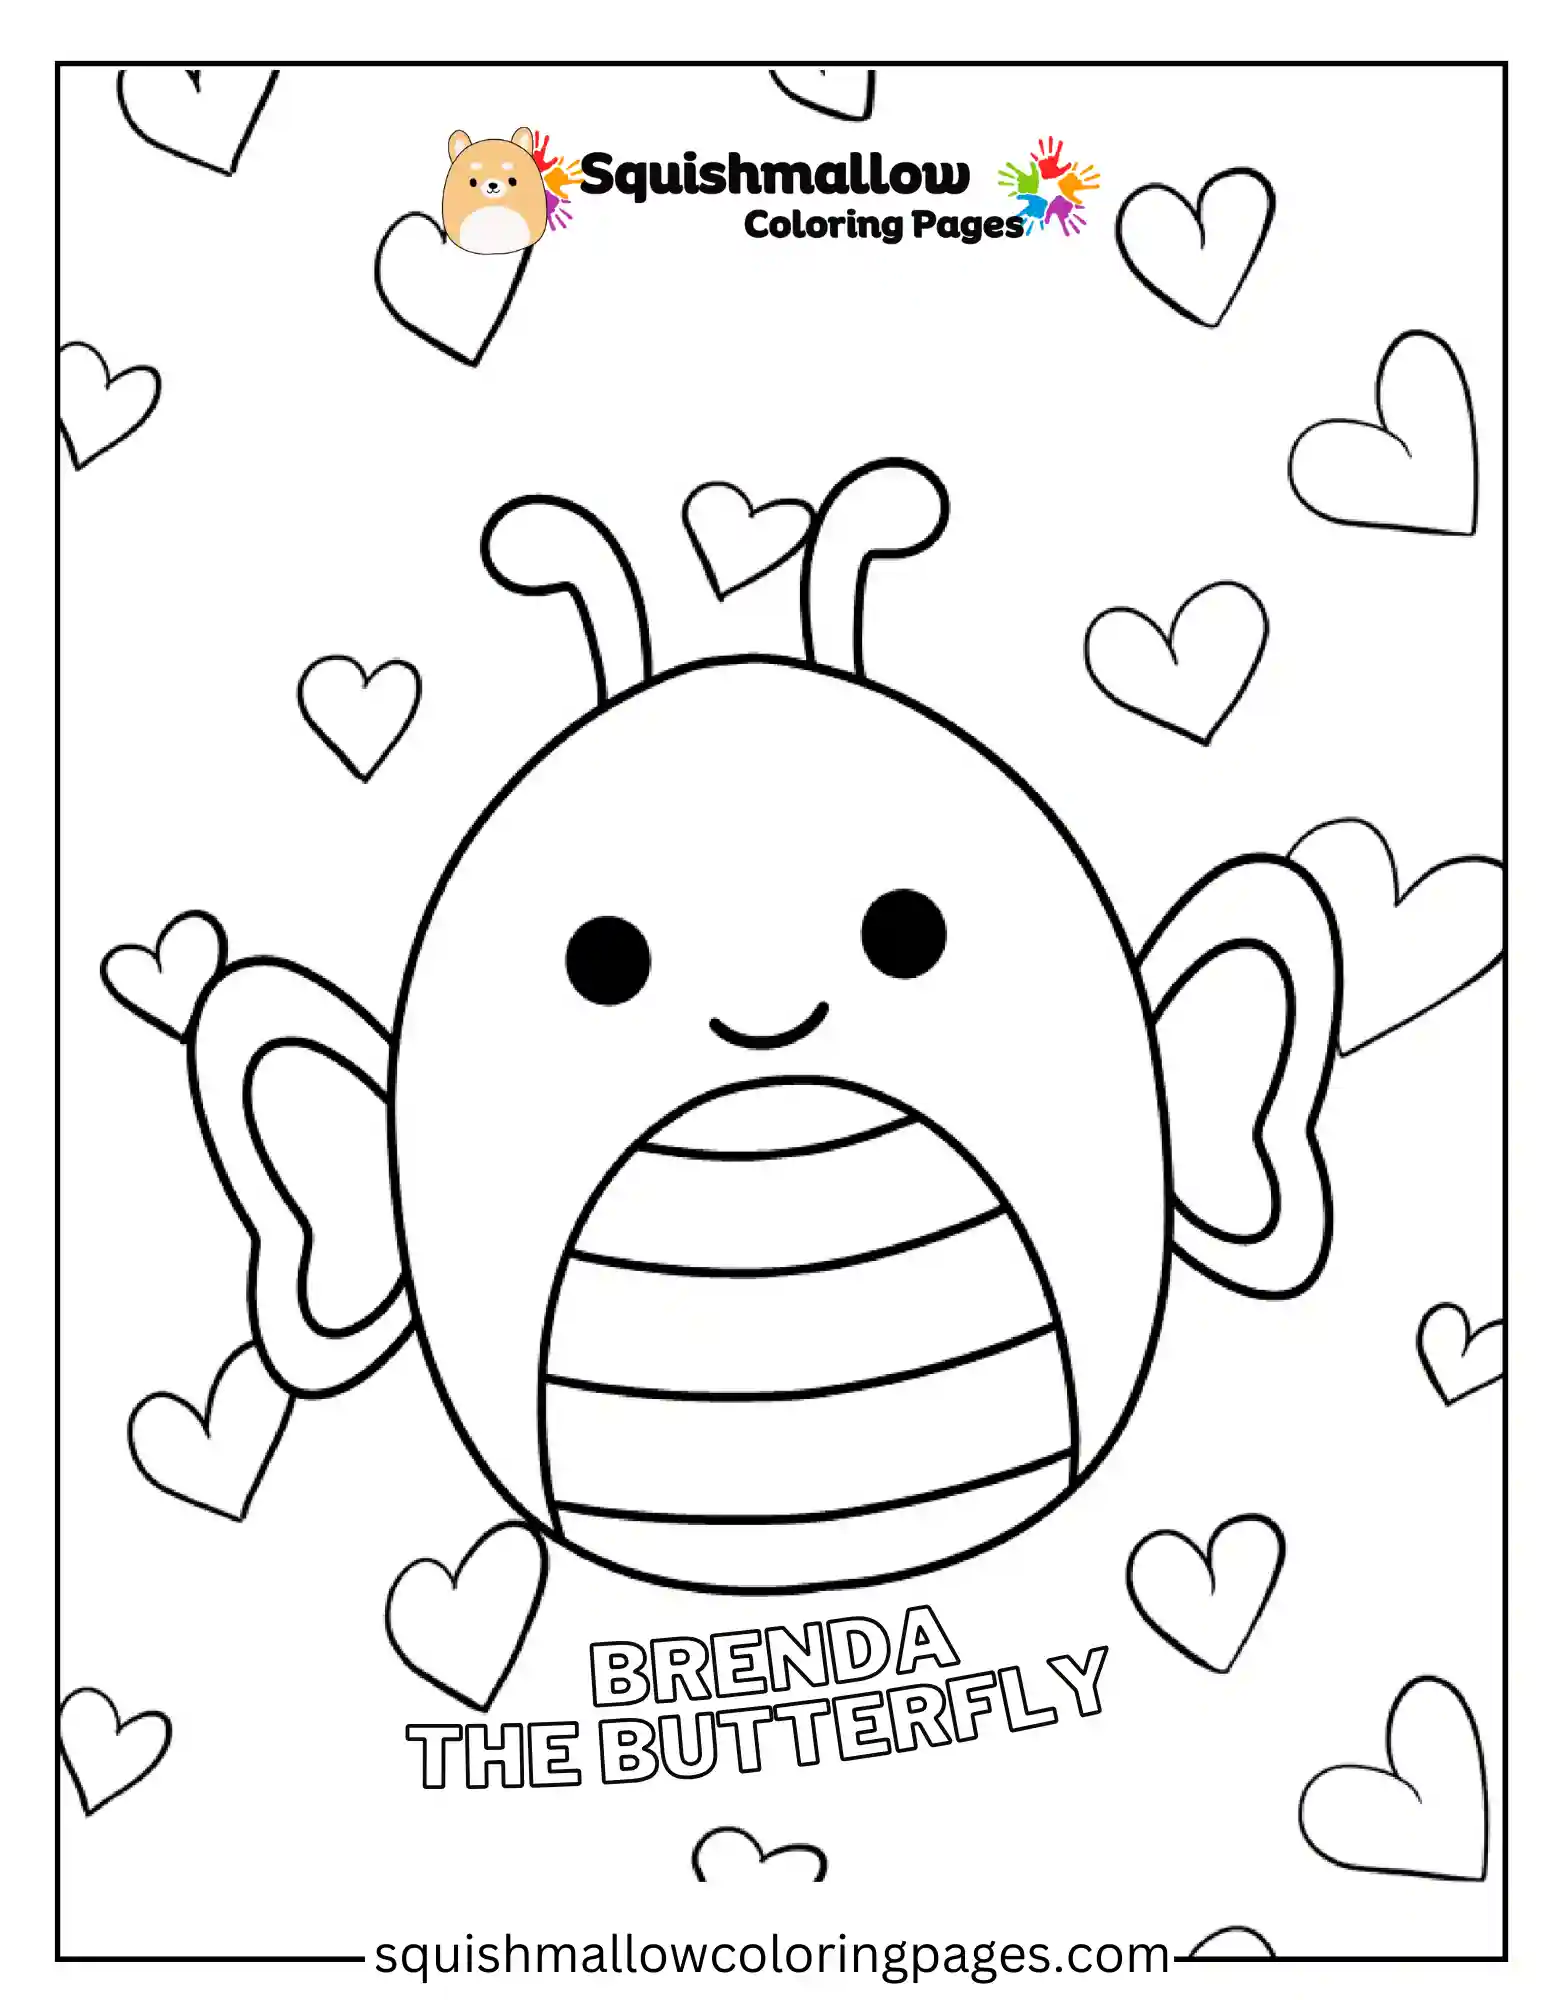 Brenda The Butterfly Squishmallow Coloring Pages